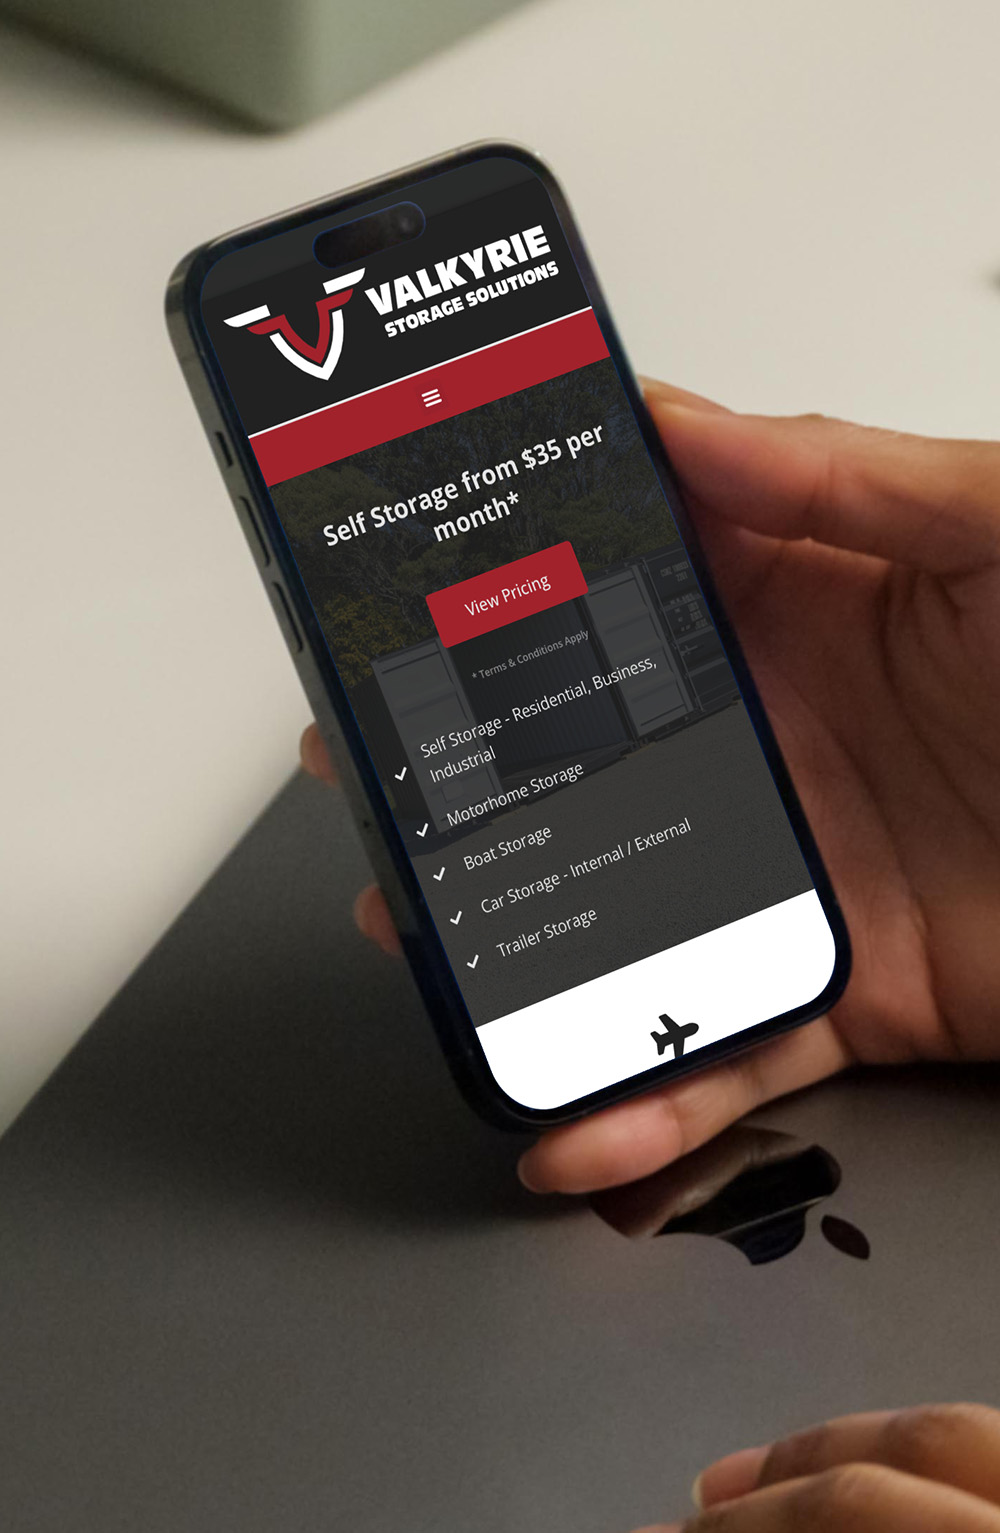 Phone showcasing our Taranaki web design services with the Valkyrie Storage website